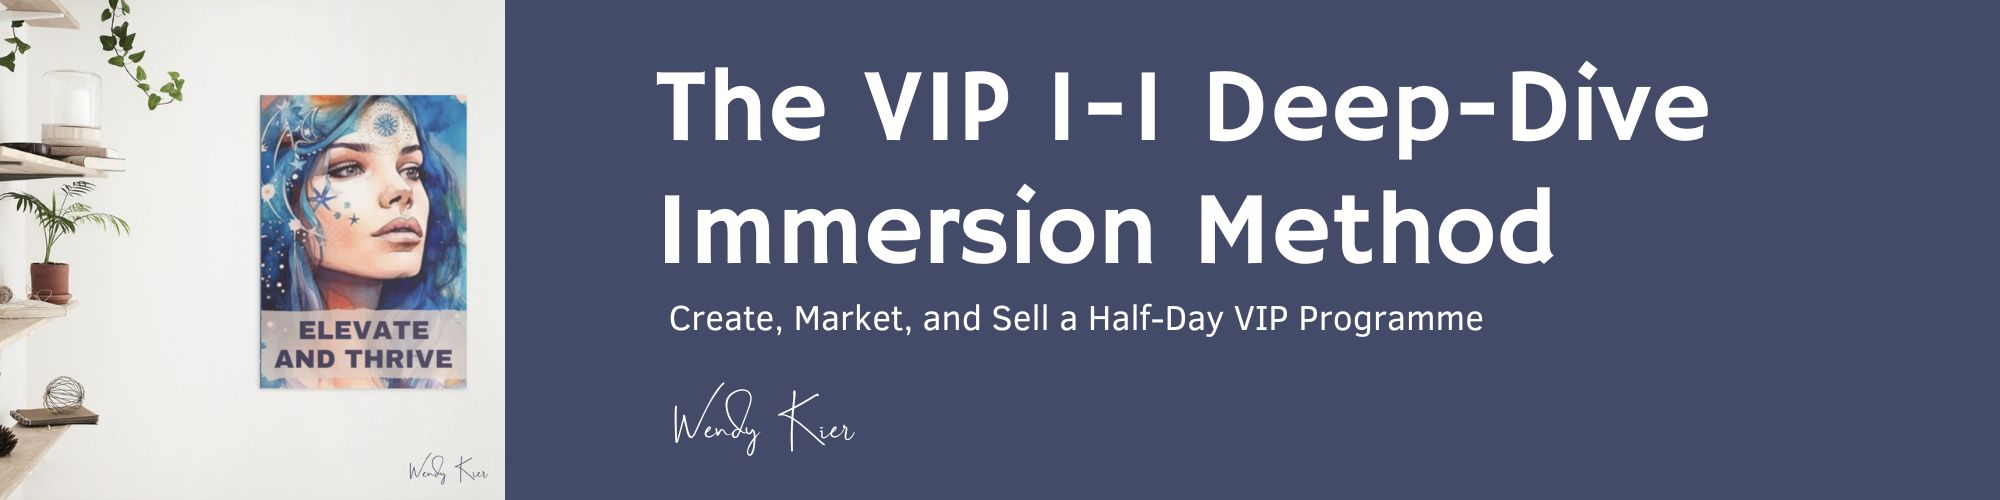 Create, Market, and Sell a Half-Day VIP Programme